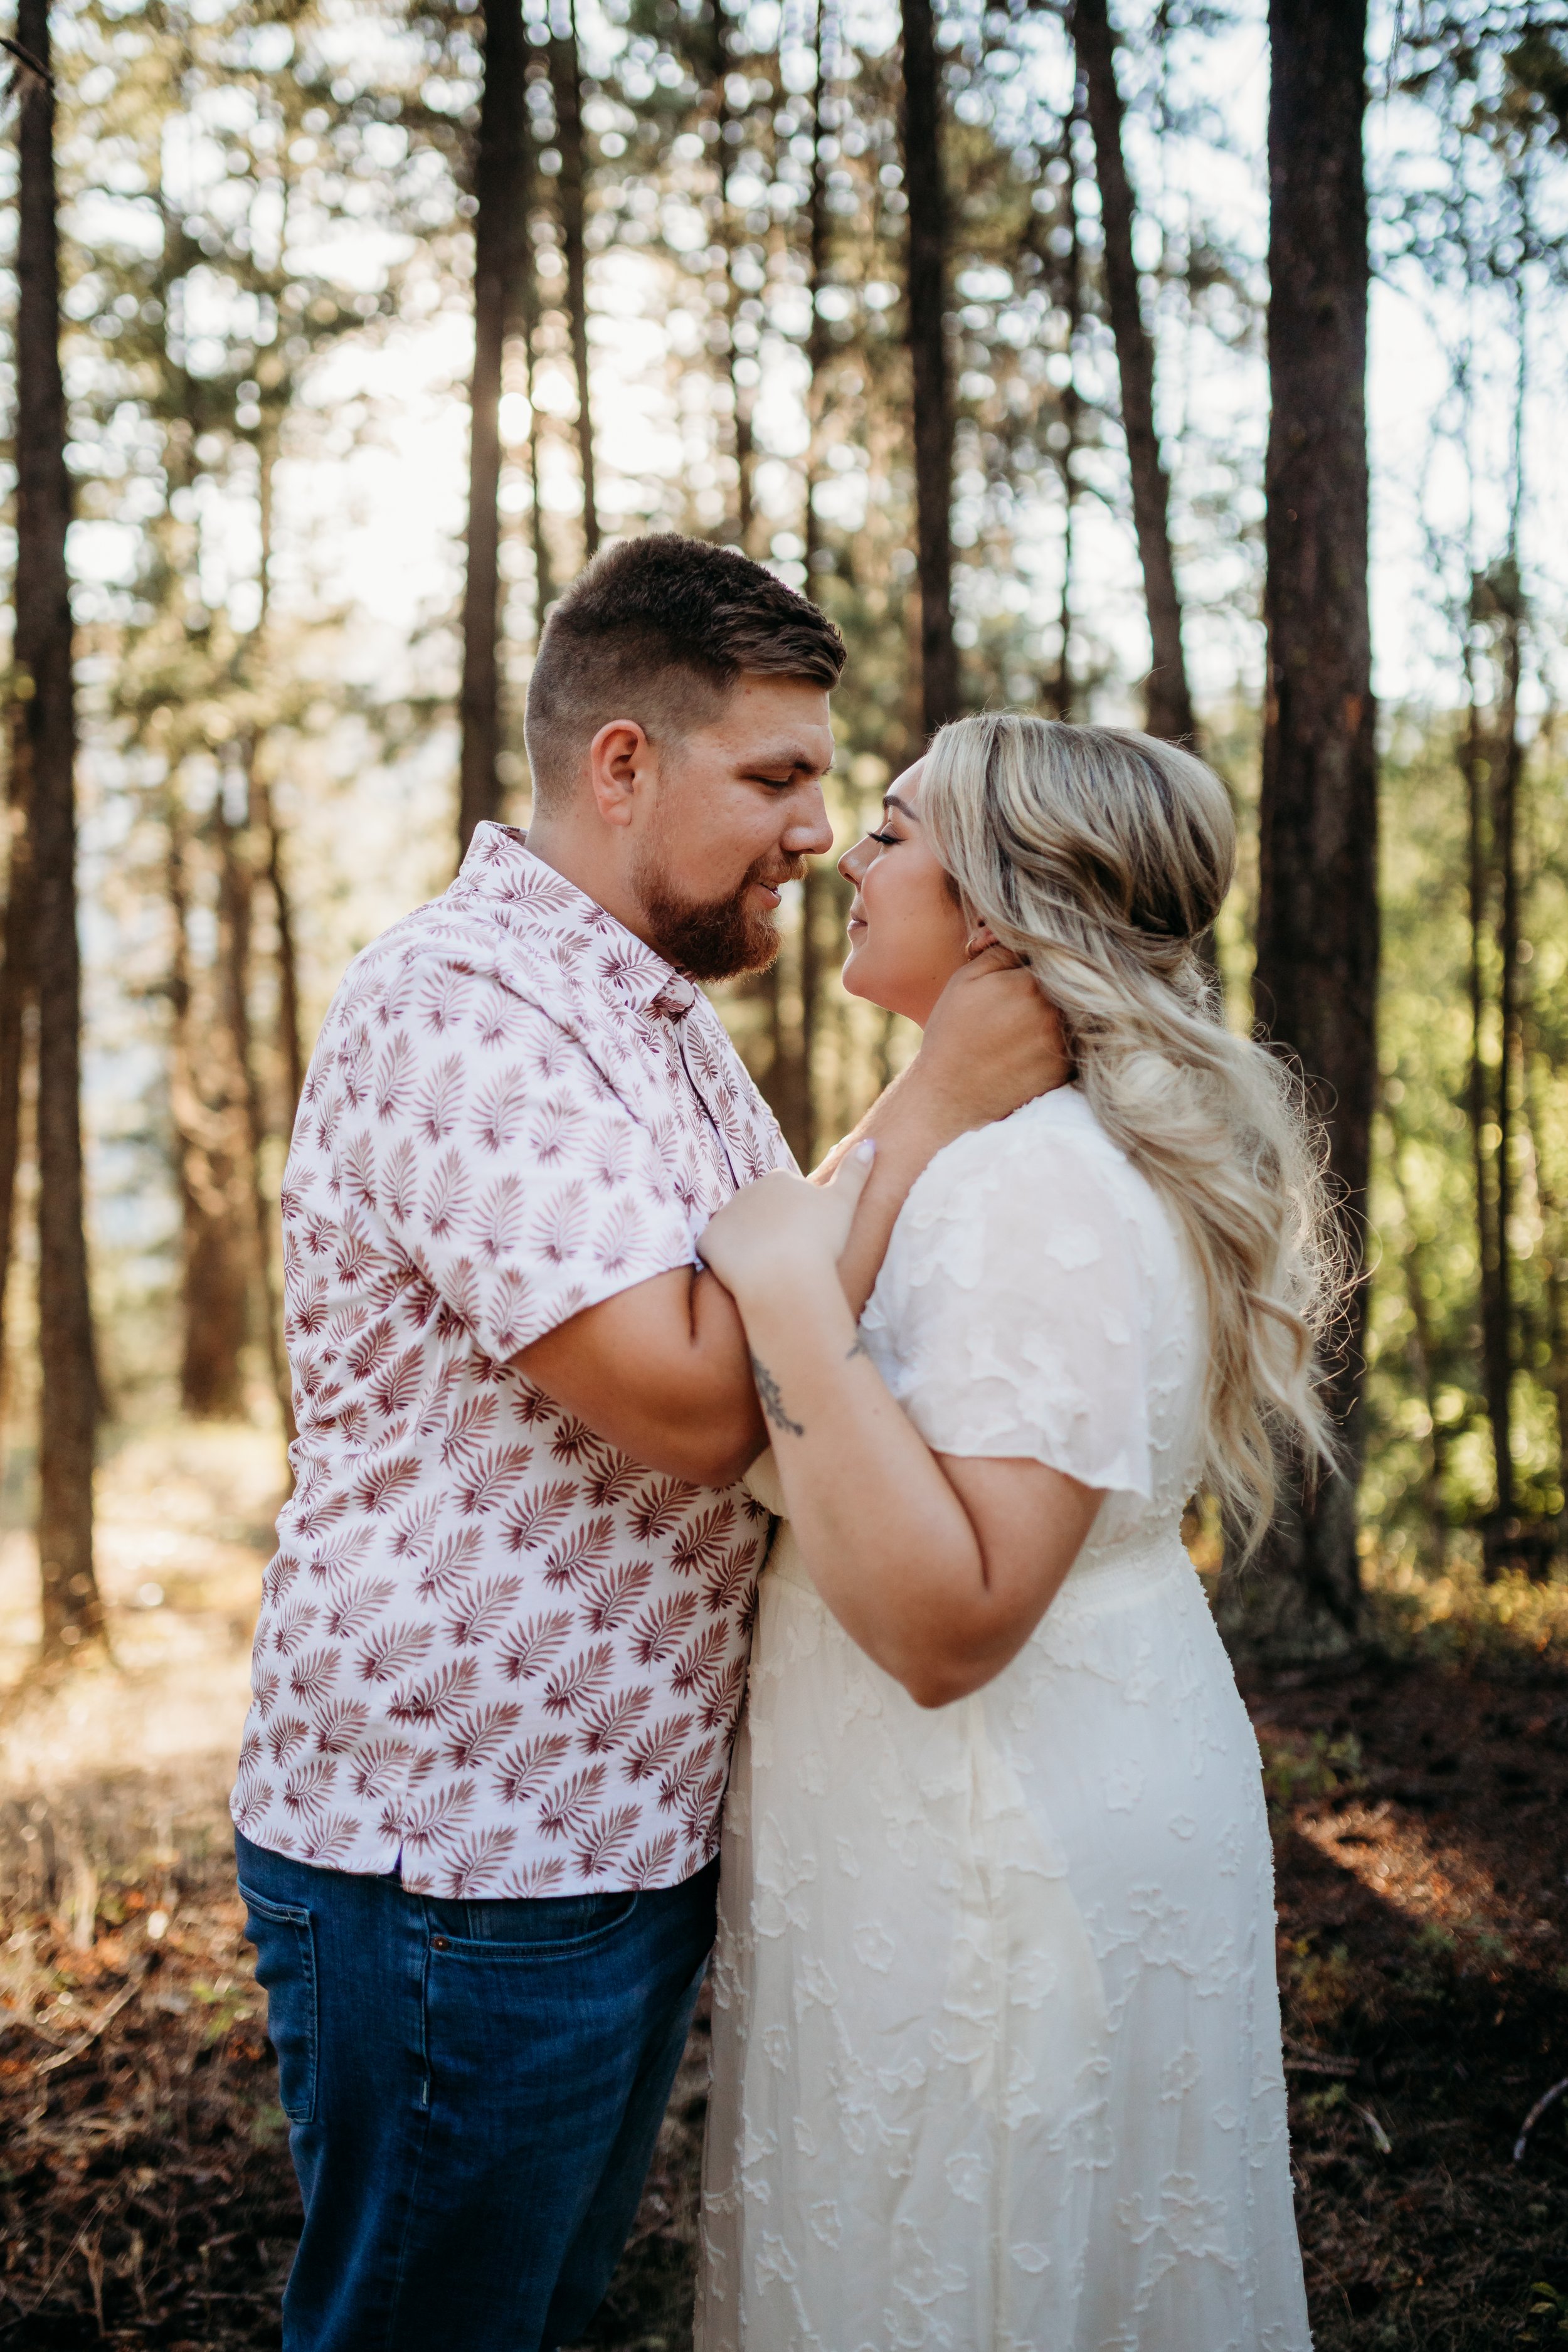 MomentsbyCailey-CassidyEthan-EngagementSession-13.jpg